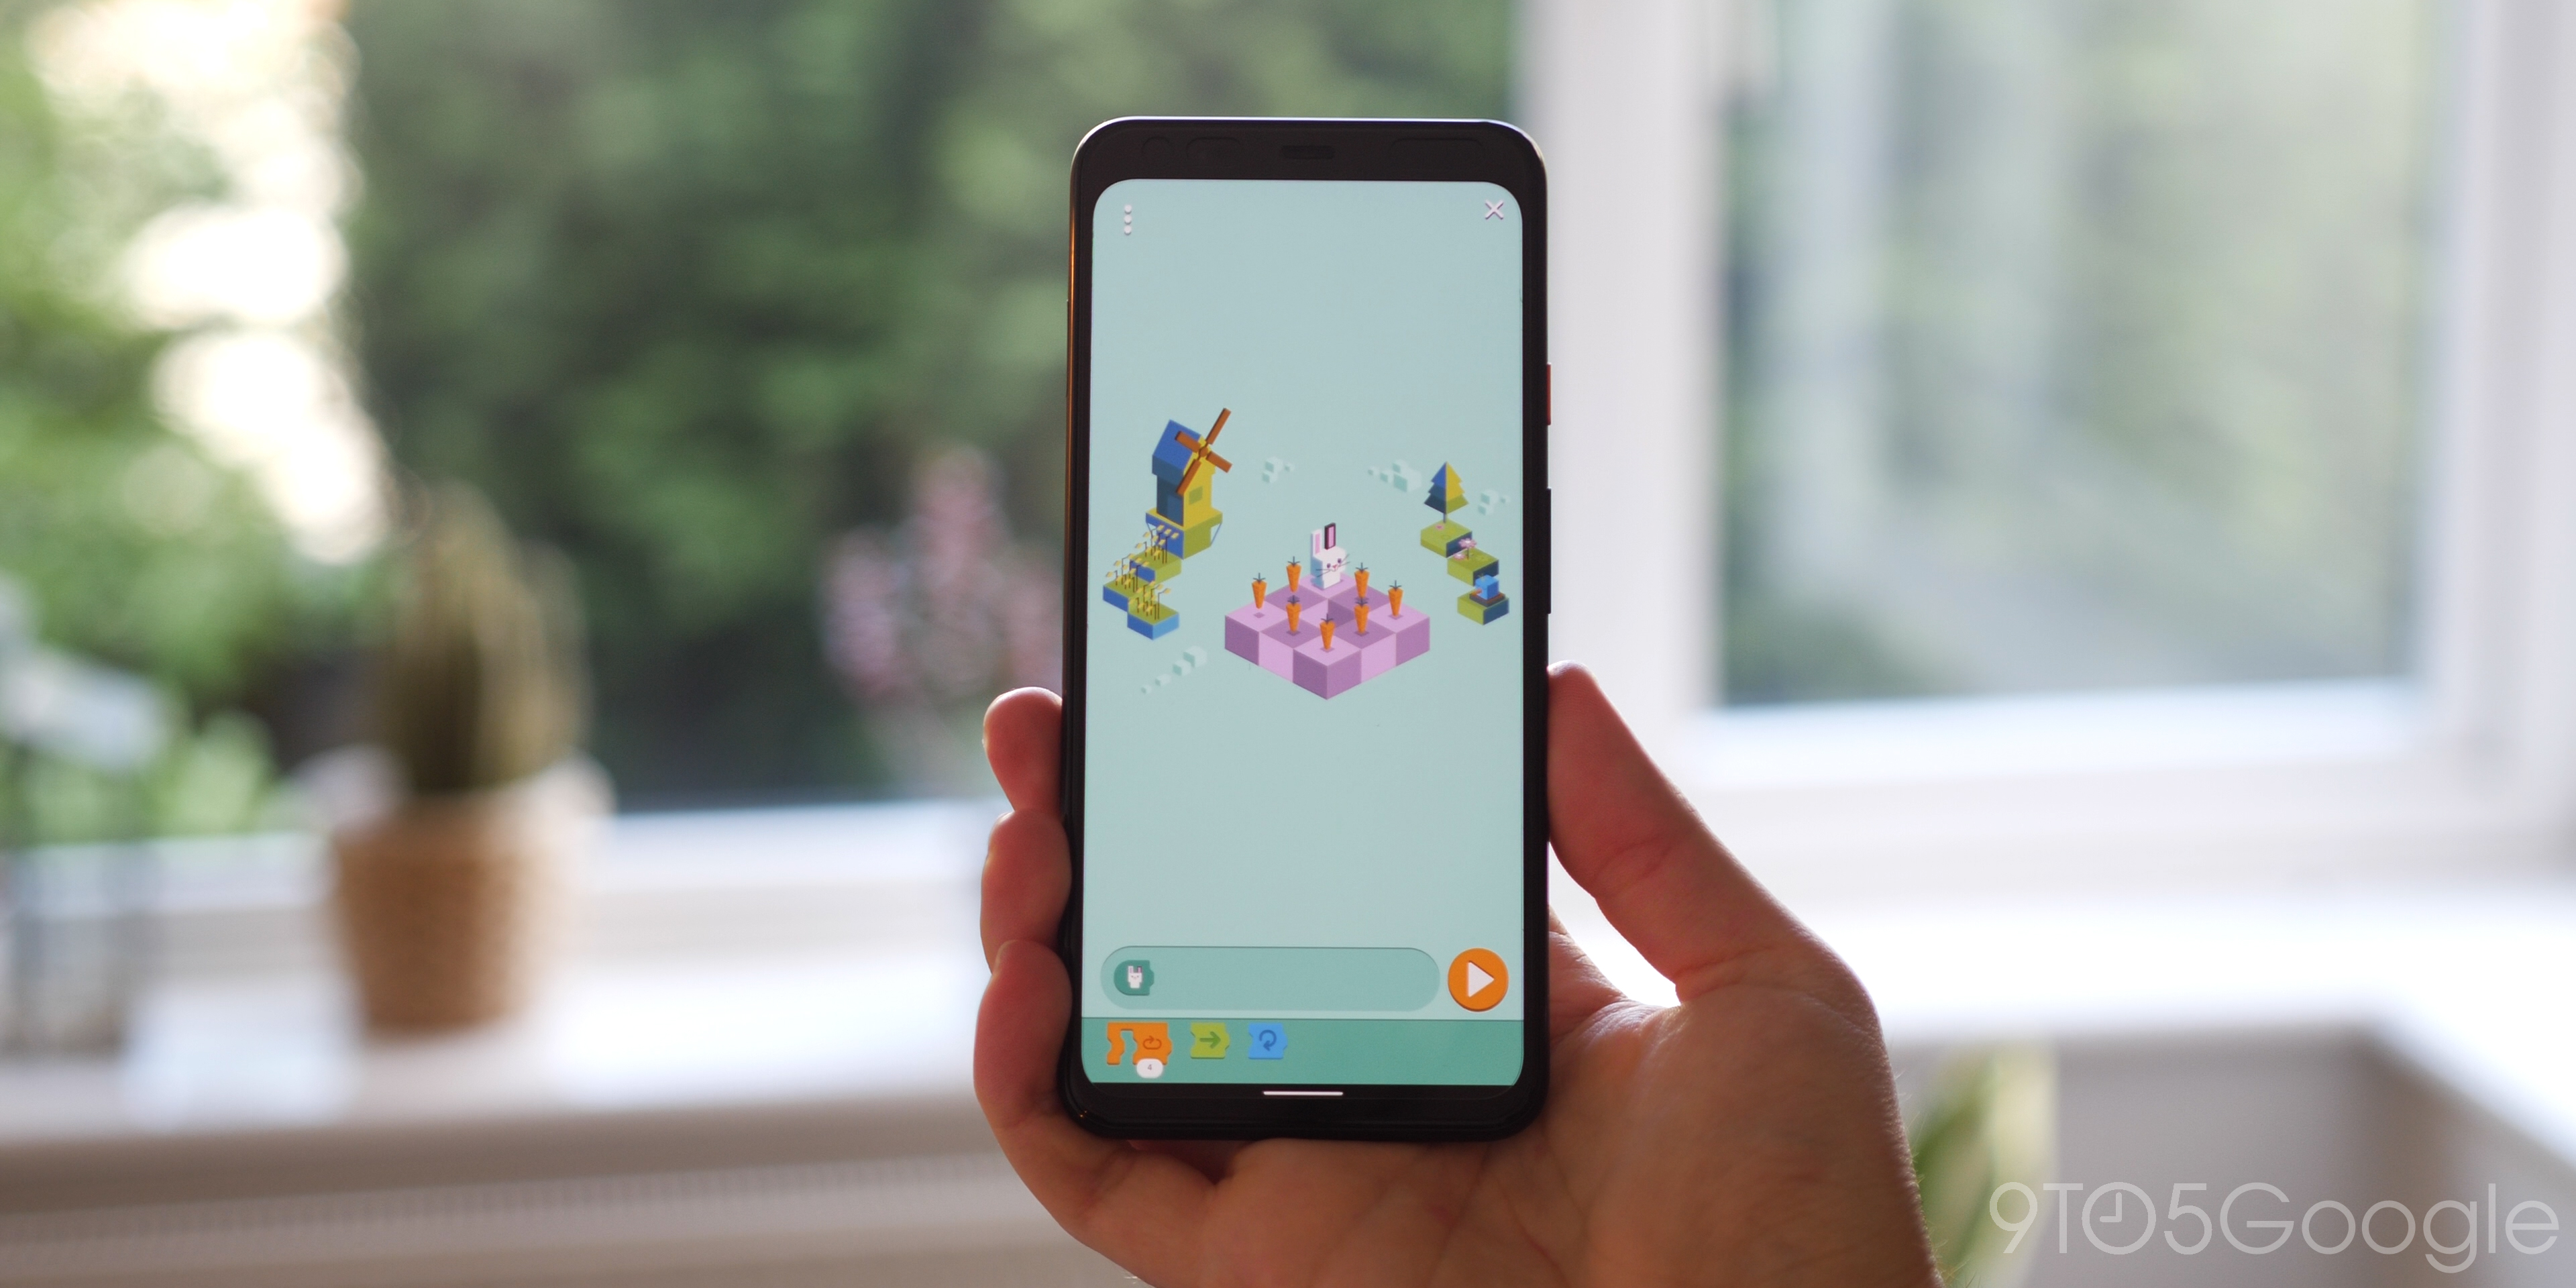 Popular Google Doodle Games 2020: Google wants you to play quirky